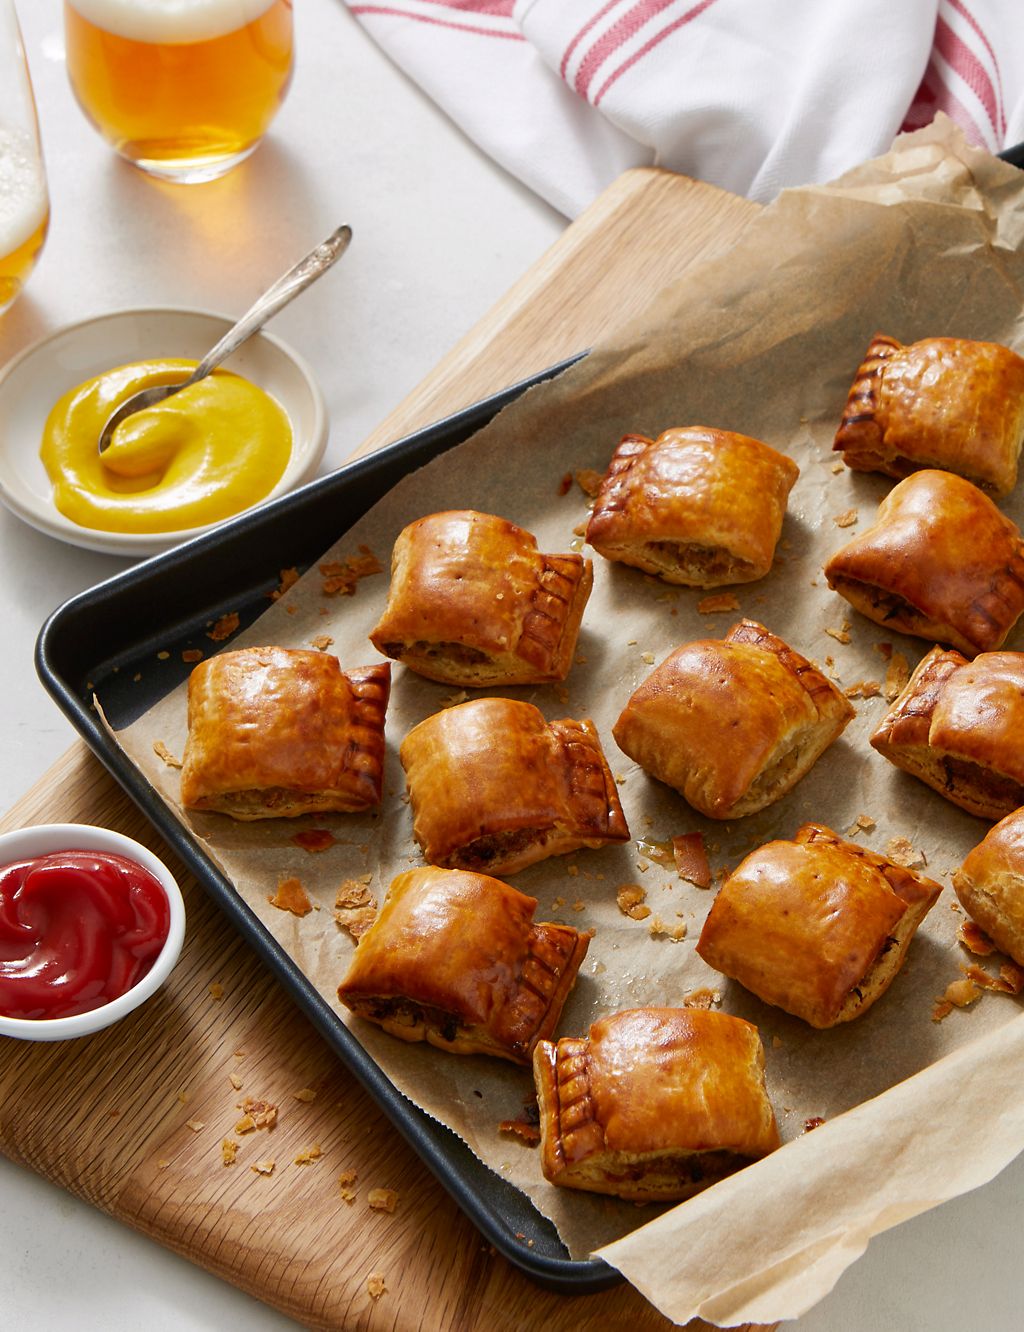 Davidstow Cheddar & Bacon Handcrafted Sausage Rolls (12 Pieces) - (Last Collection Date 30th September 2020) 3 of 3